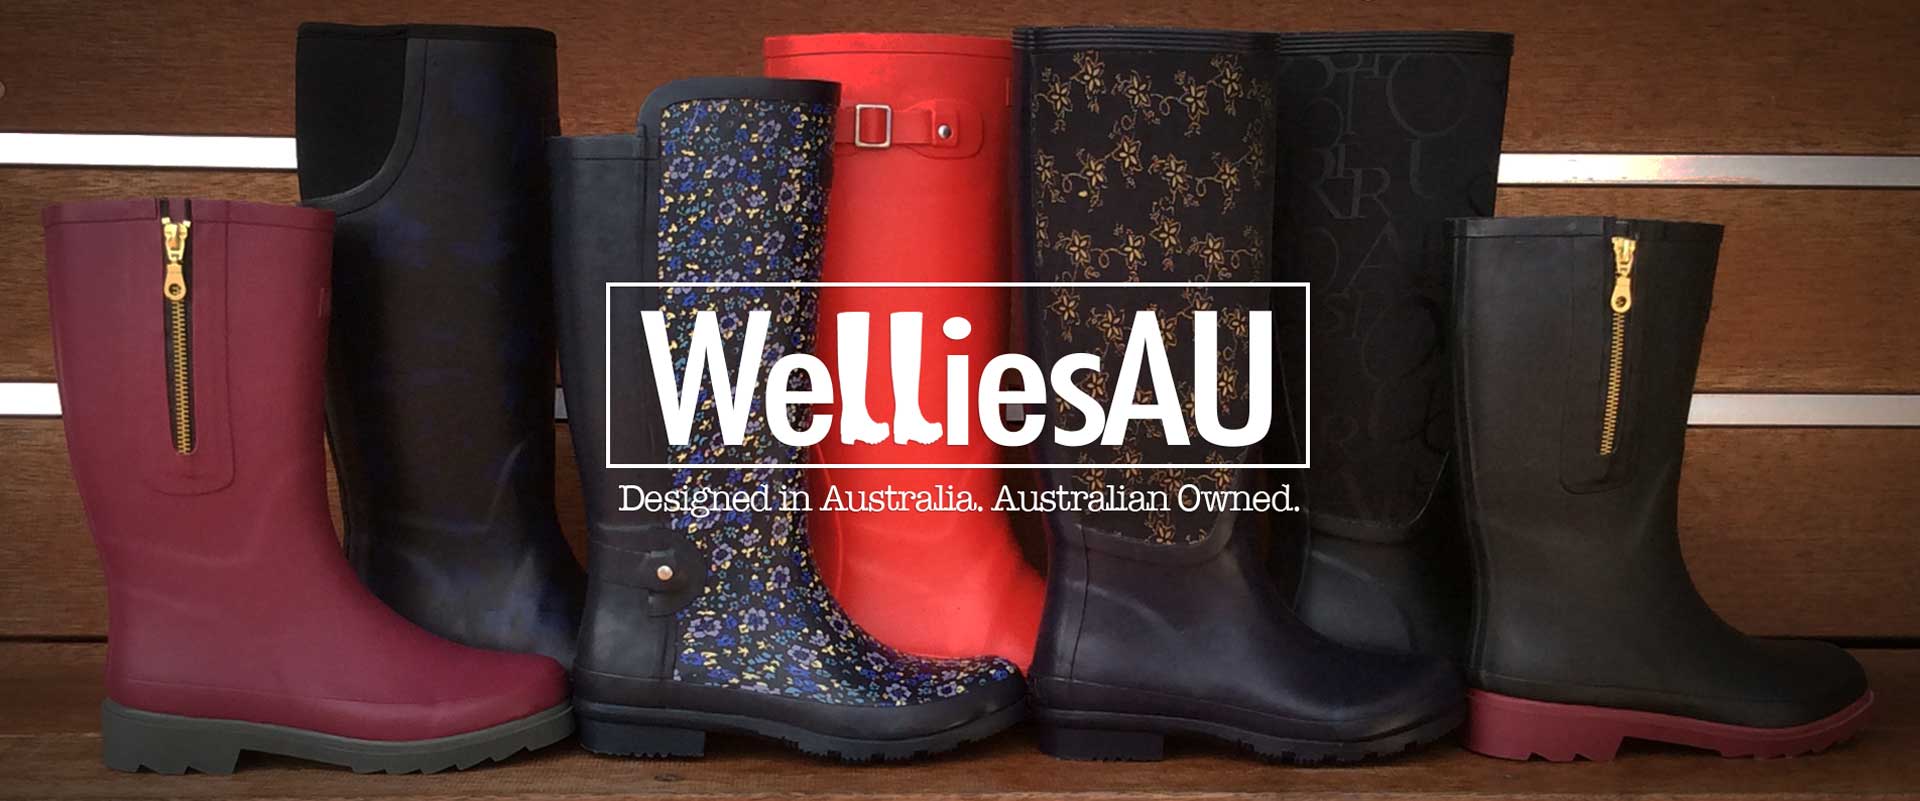 Wellies up to 60% OFF on sale styles for men, women and kids